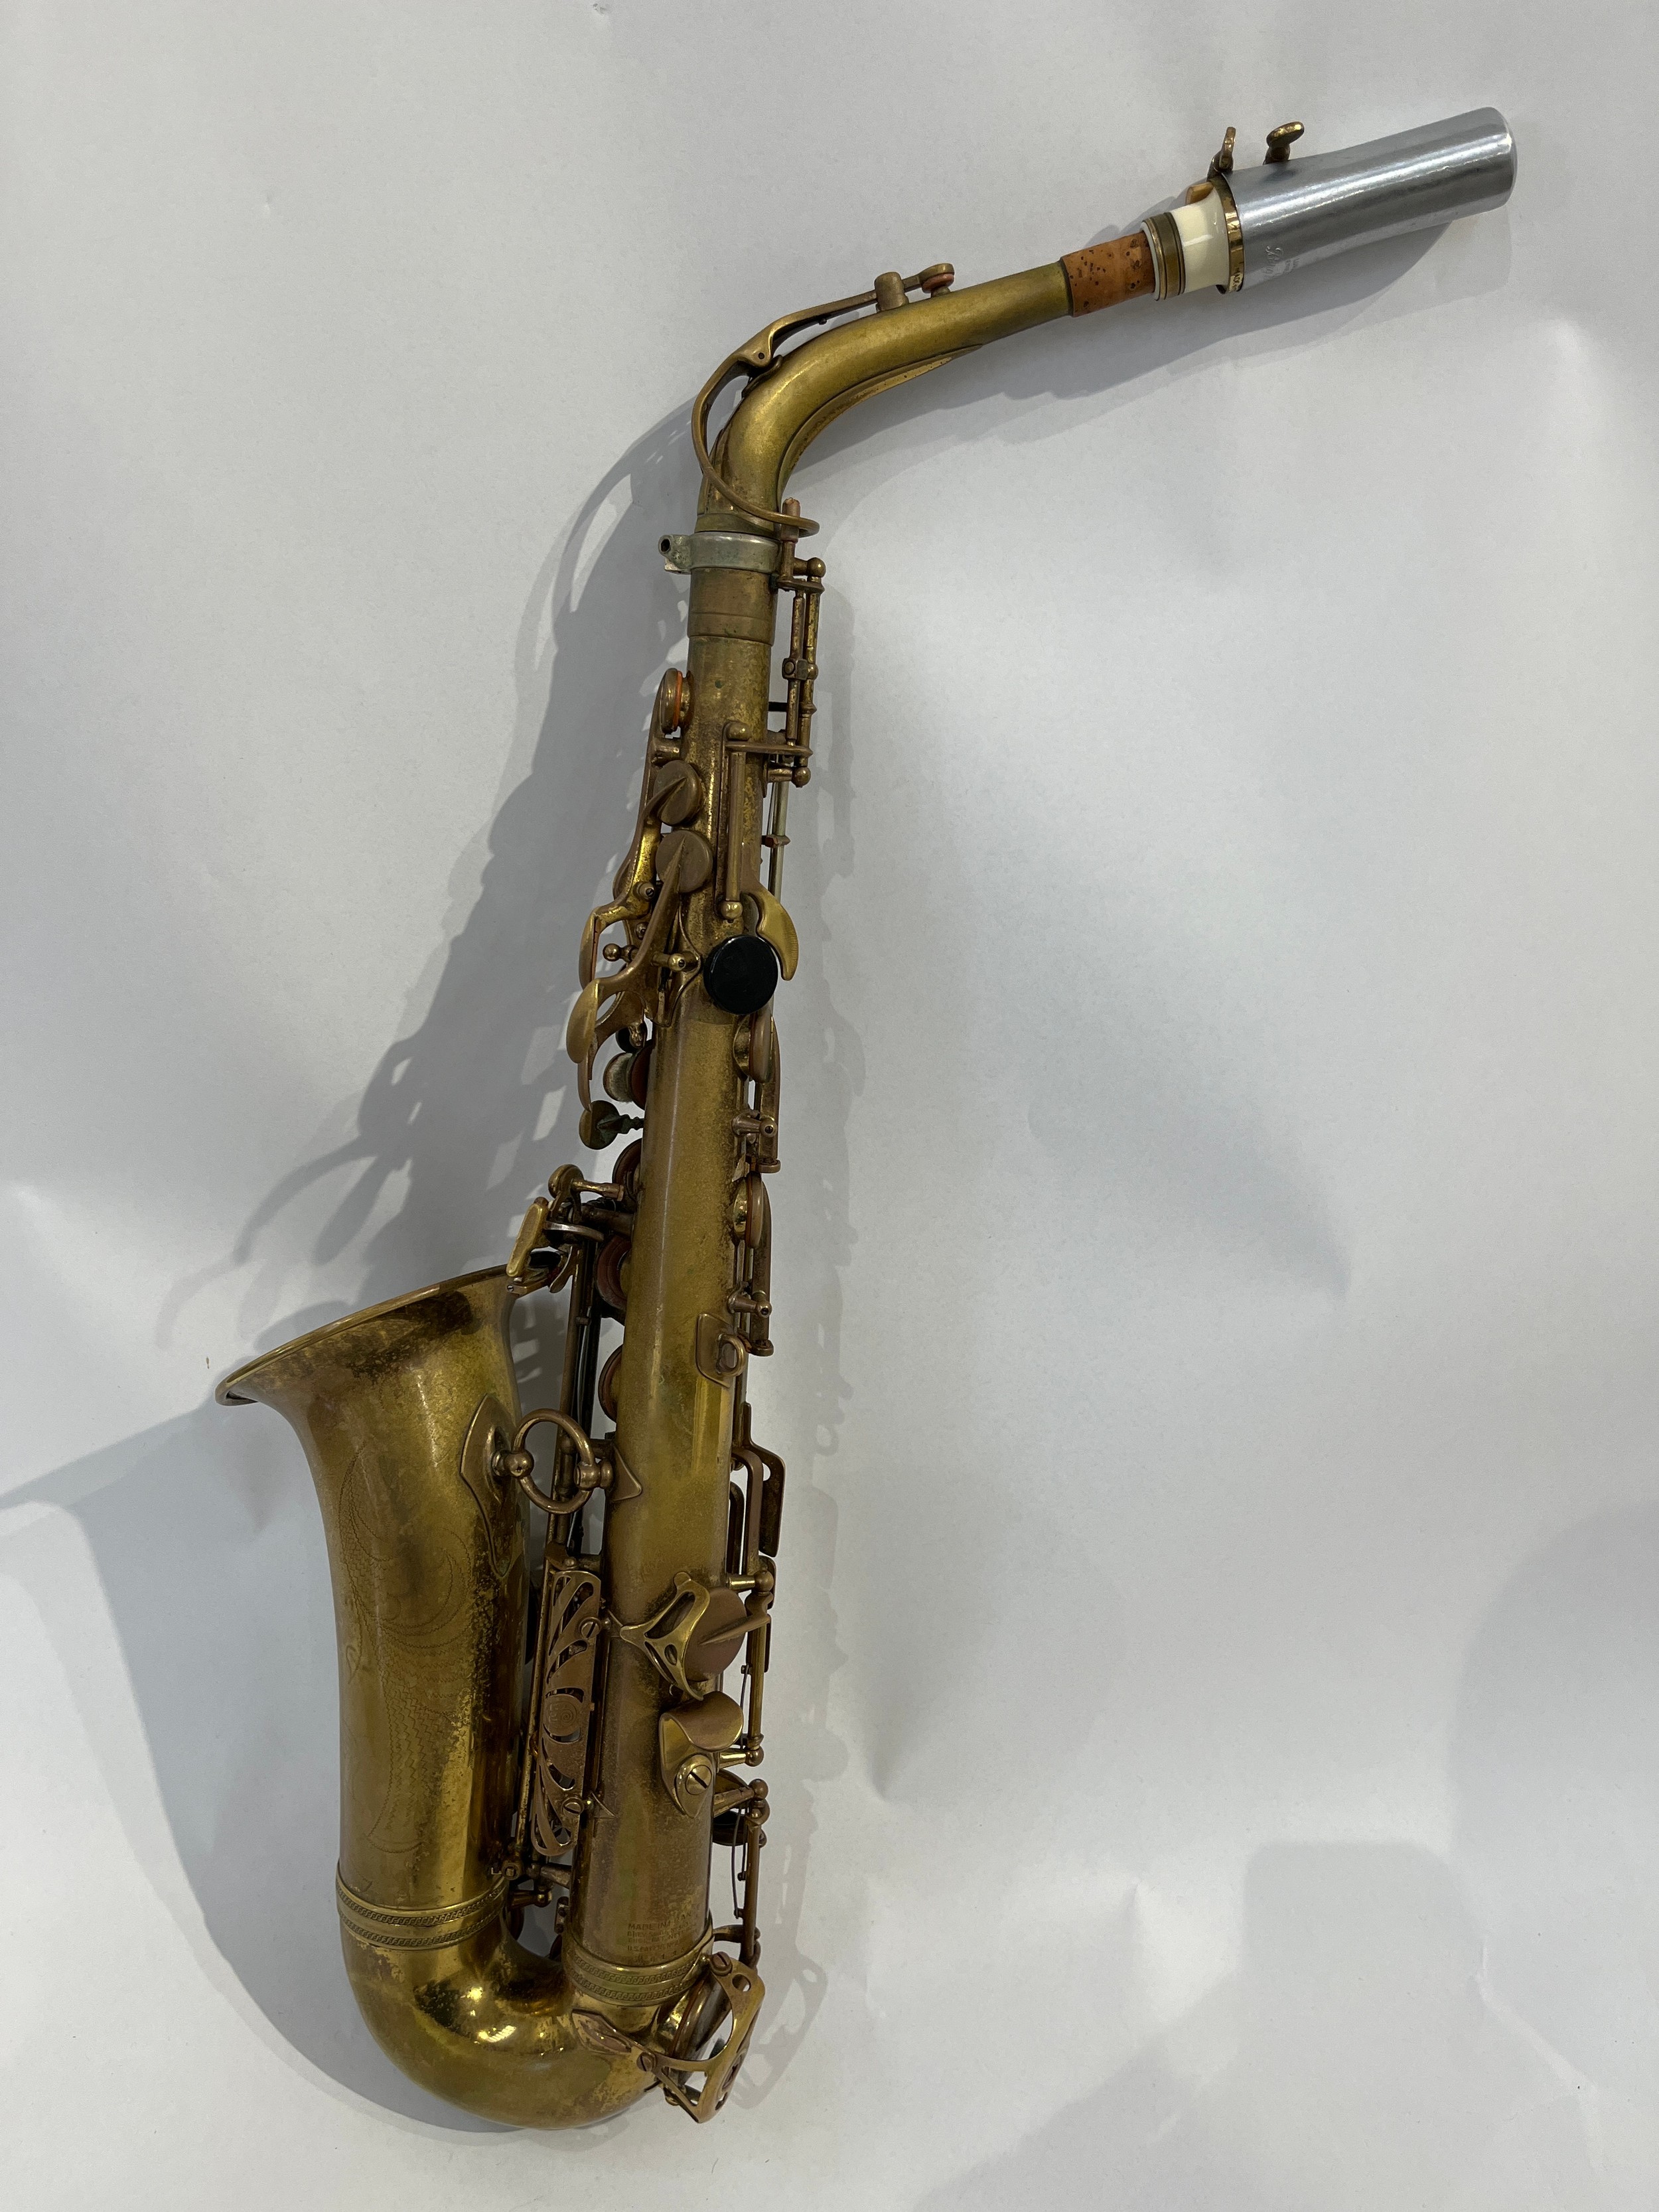 A 1955 Selmer Super Action alto saxophone serial no. M61153, hard cased - Image 2 of 4